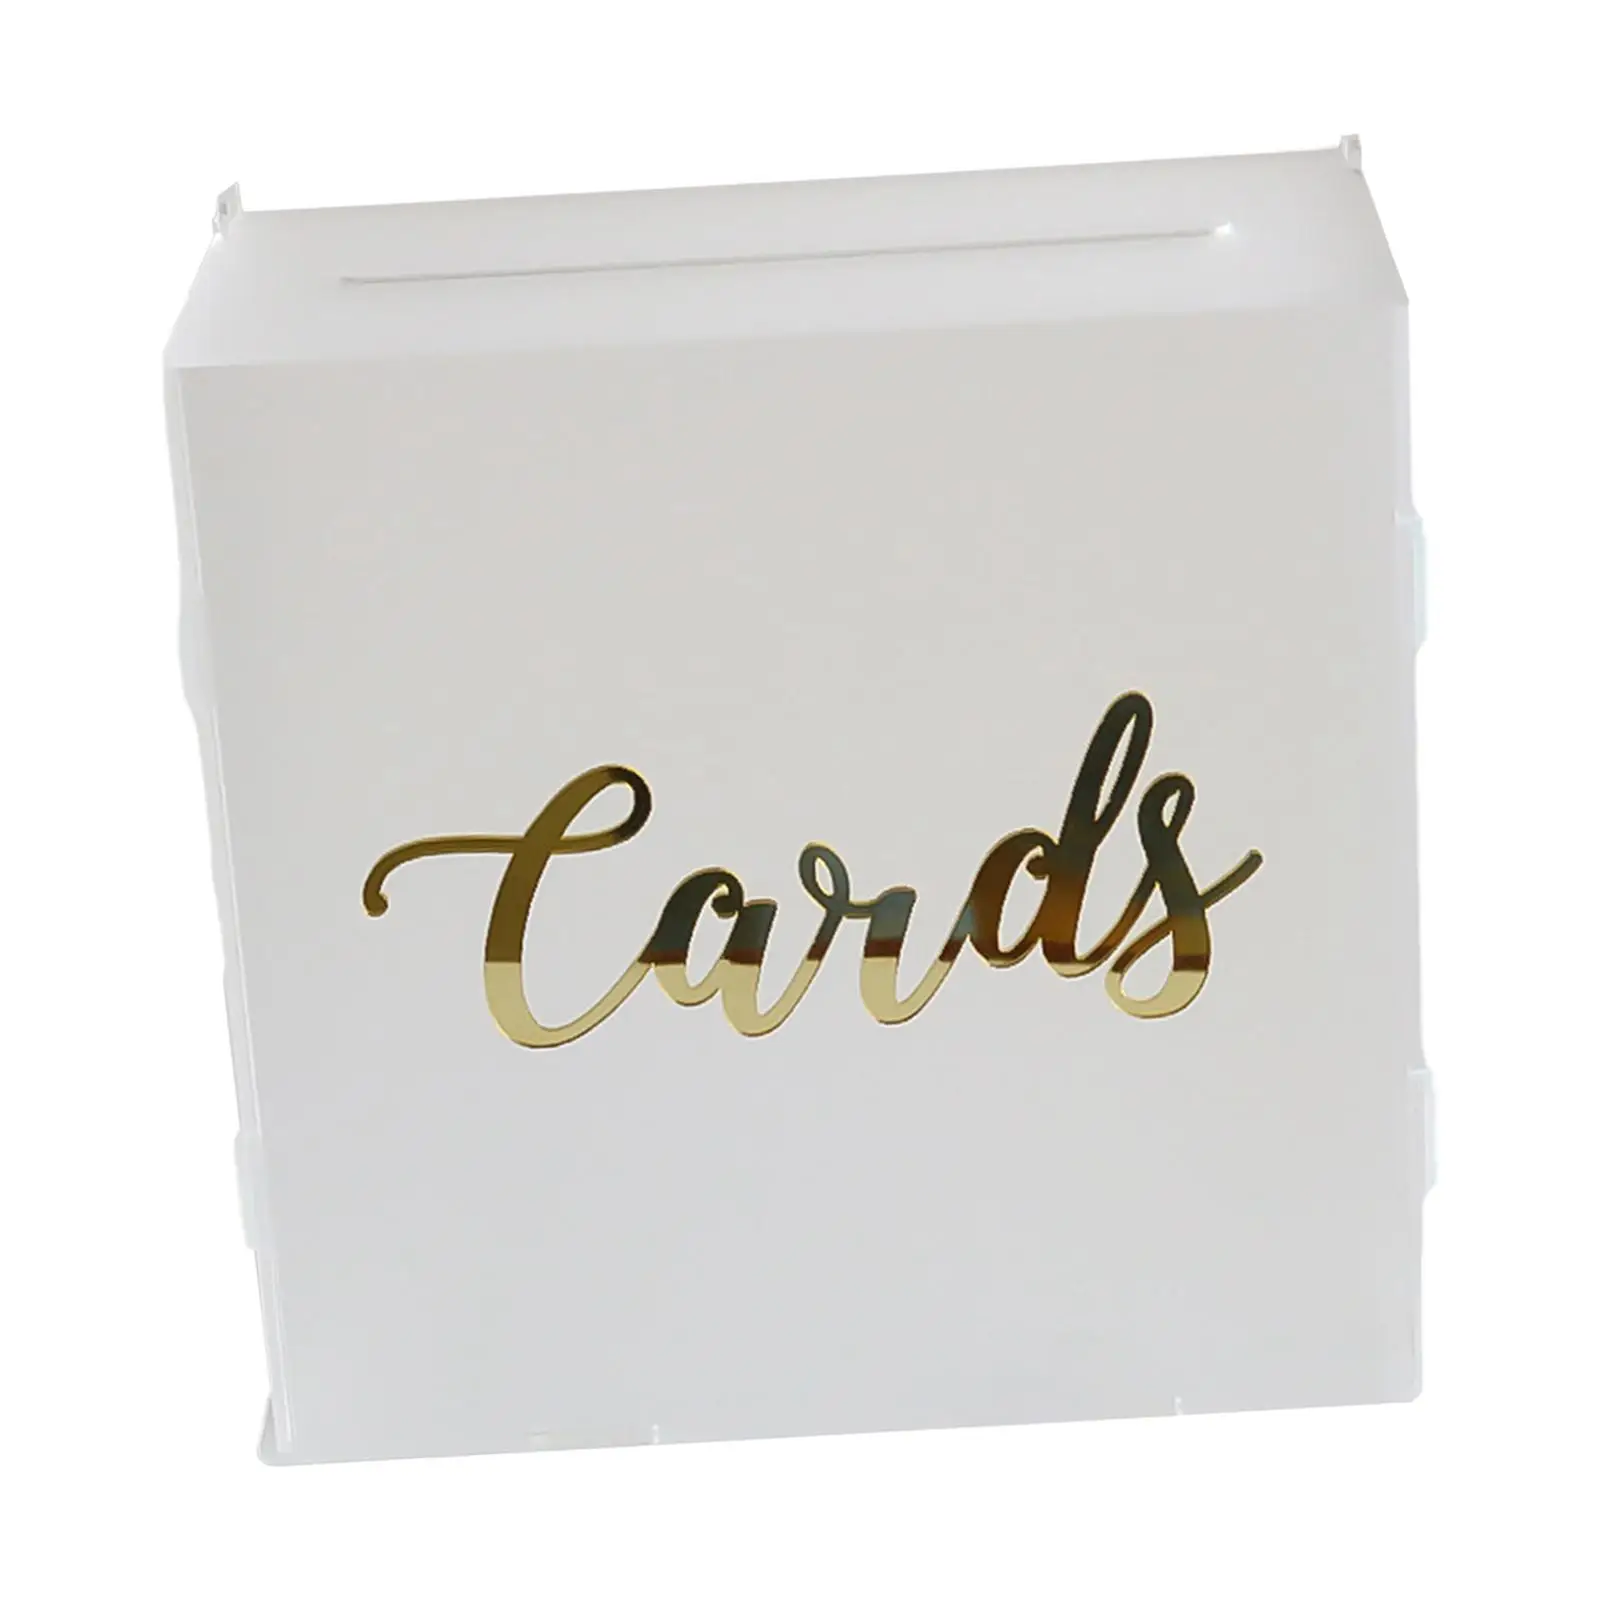 Acrylic Wedding Cards Boxes Party Favors Greeting Card Box Acrylic Card Box for Reception Graduation Anniversary Party Wedding